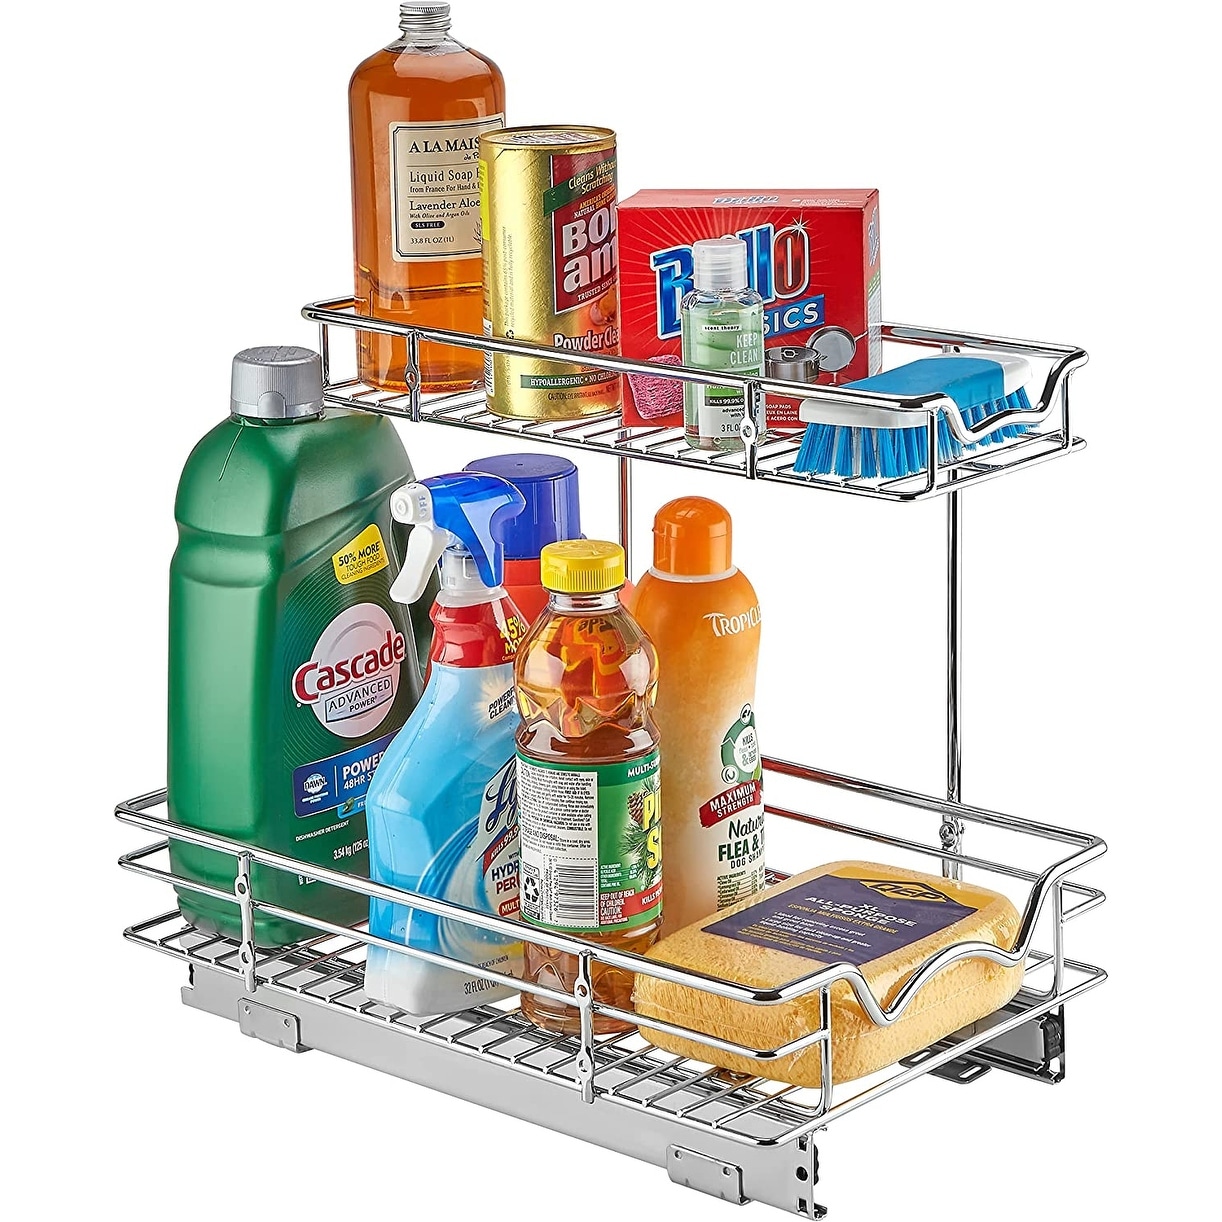 https://ak1.ostkcdn.com/images/products/is/images/direct/7148f170e9e08366fea18f0e8483c557b2558bbb/Slide-Out-Cabinet-Organizer---11%22W-X18%22D-X14-1-2%22H%2C-Two-Tier-Roll-Out.jpg